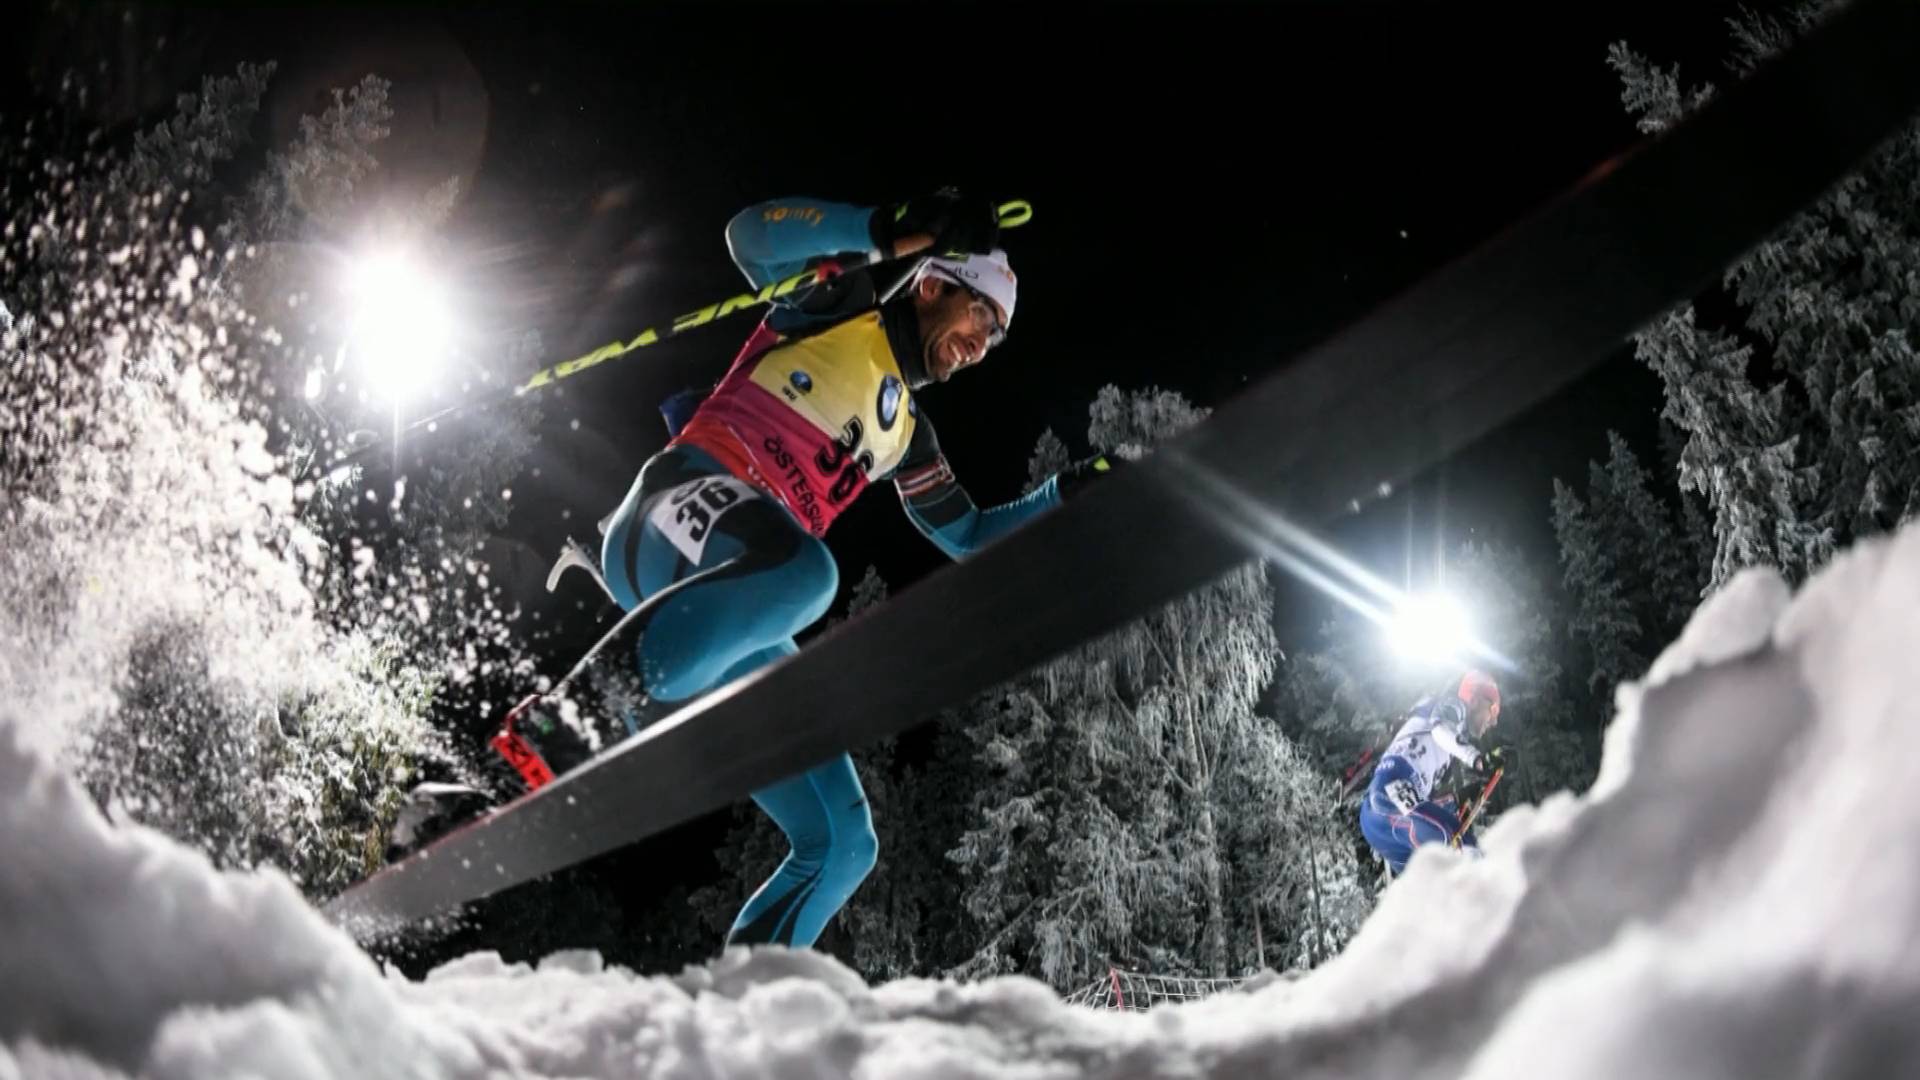 GLOBALink | Winners of WMS global winter sports photo contest announced